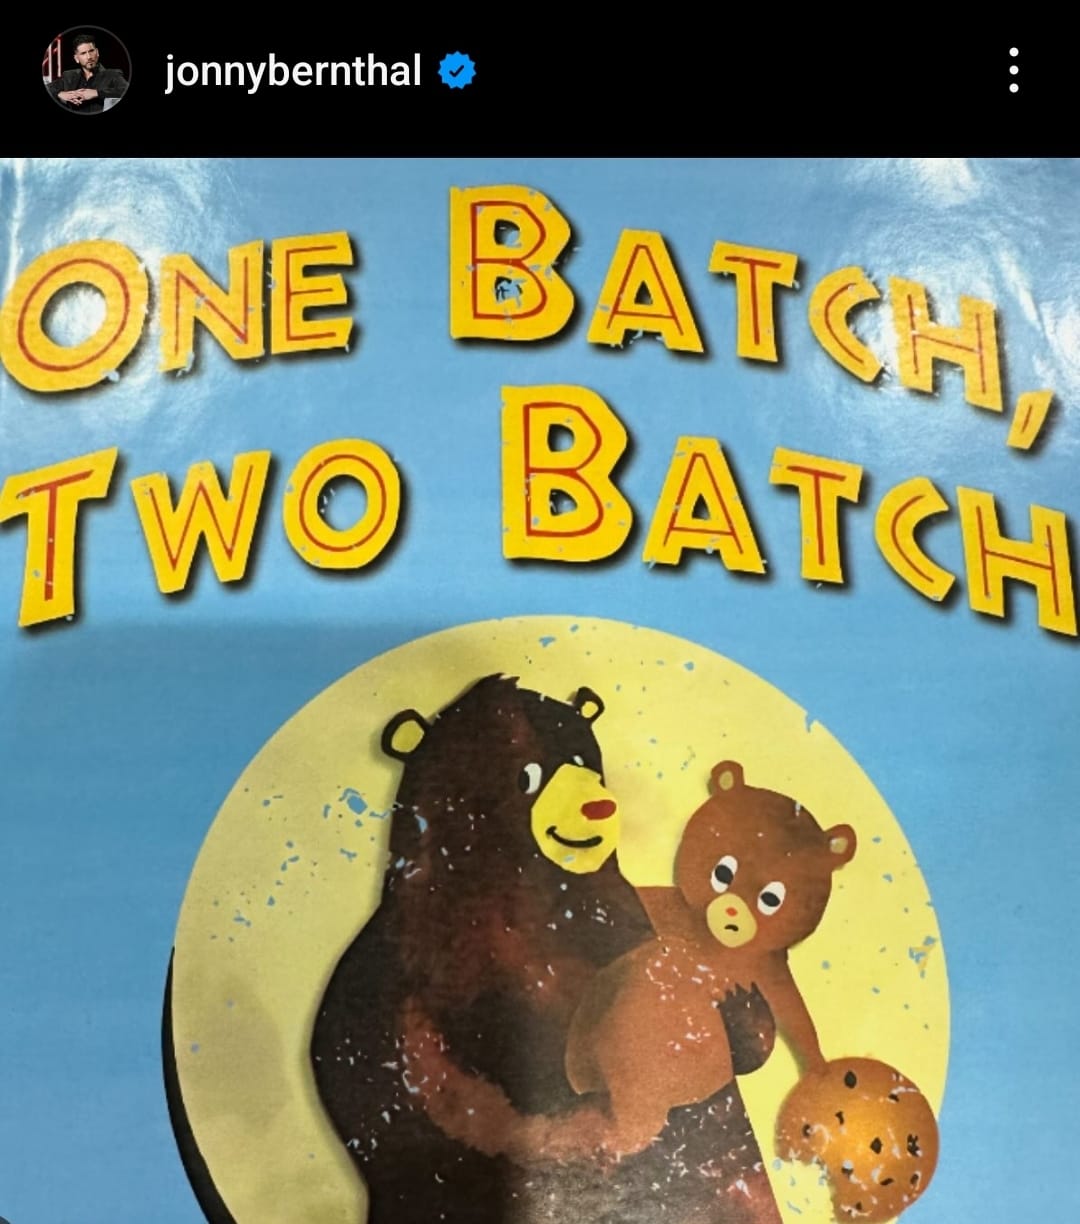 Jon Bernthal's Punisher is Back!! Jon Bernthal's latest Instagram Post showing the cover to "One Batch, Two Batch Penny and Dime," a book Frank failed to read to his daughter the night before she, her brother, and her mother got killed at Central Park.